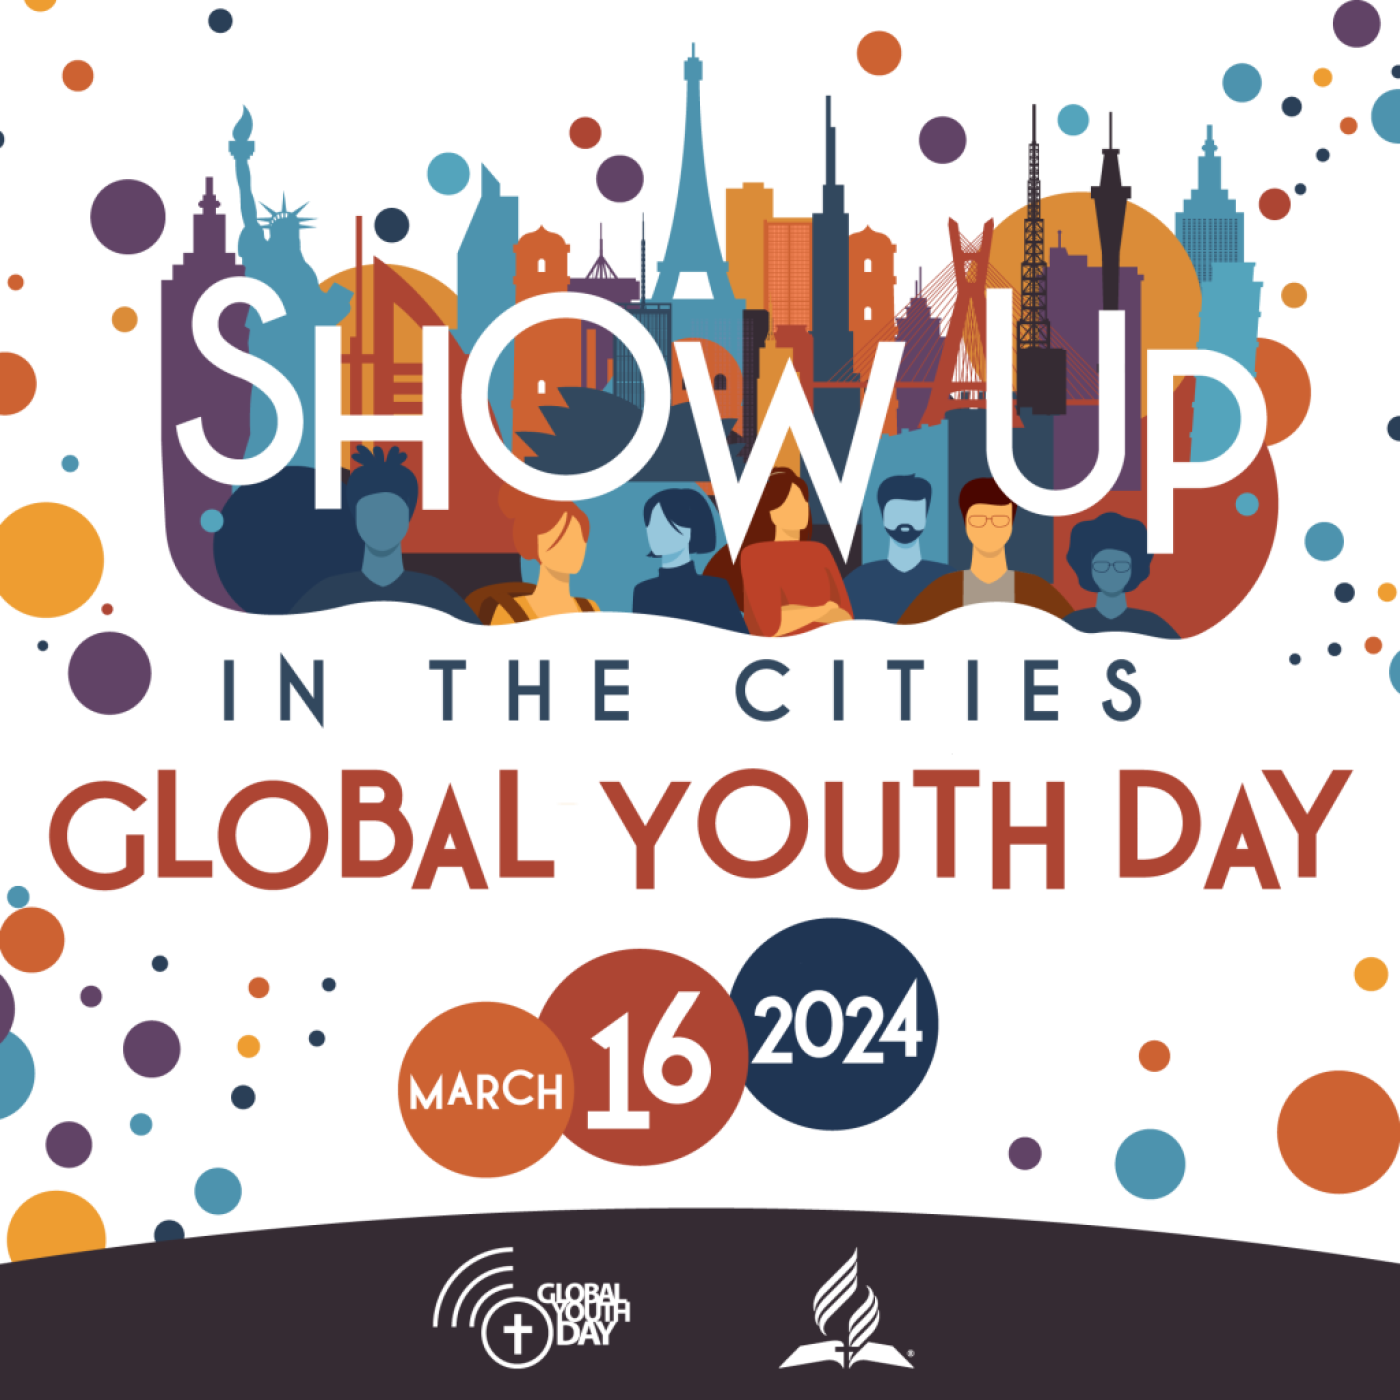 GLOBAL YOUTH DAY